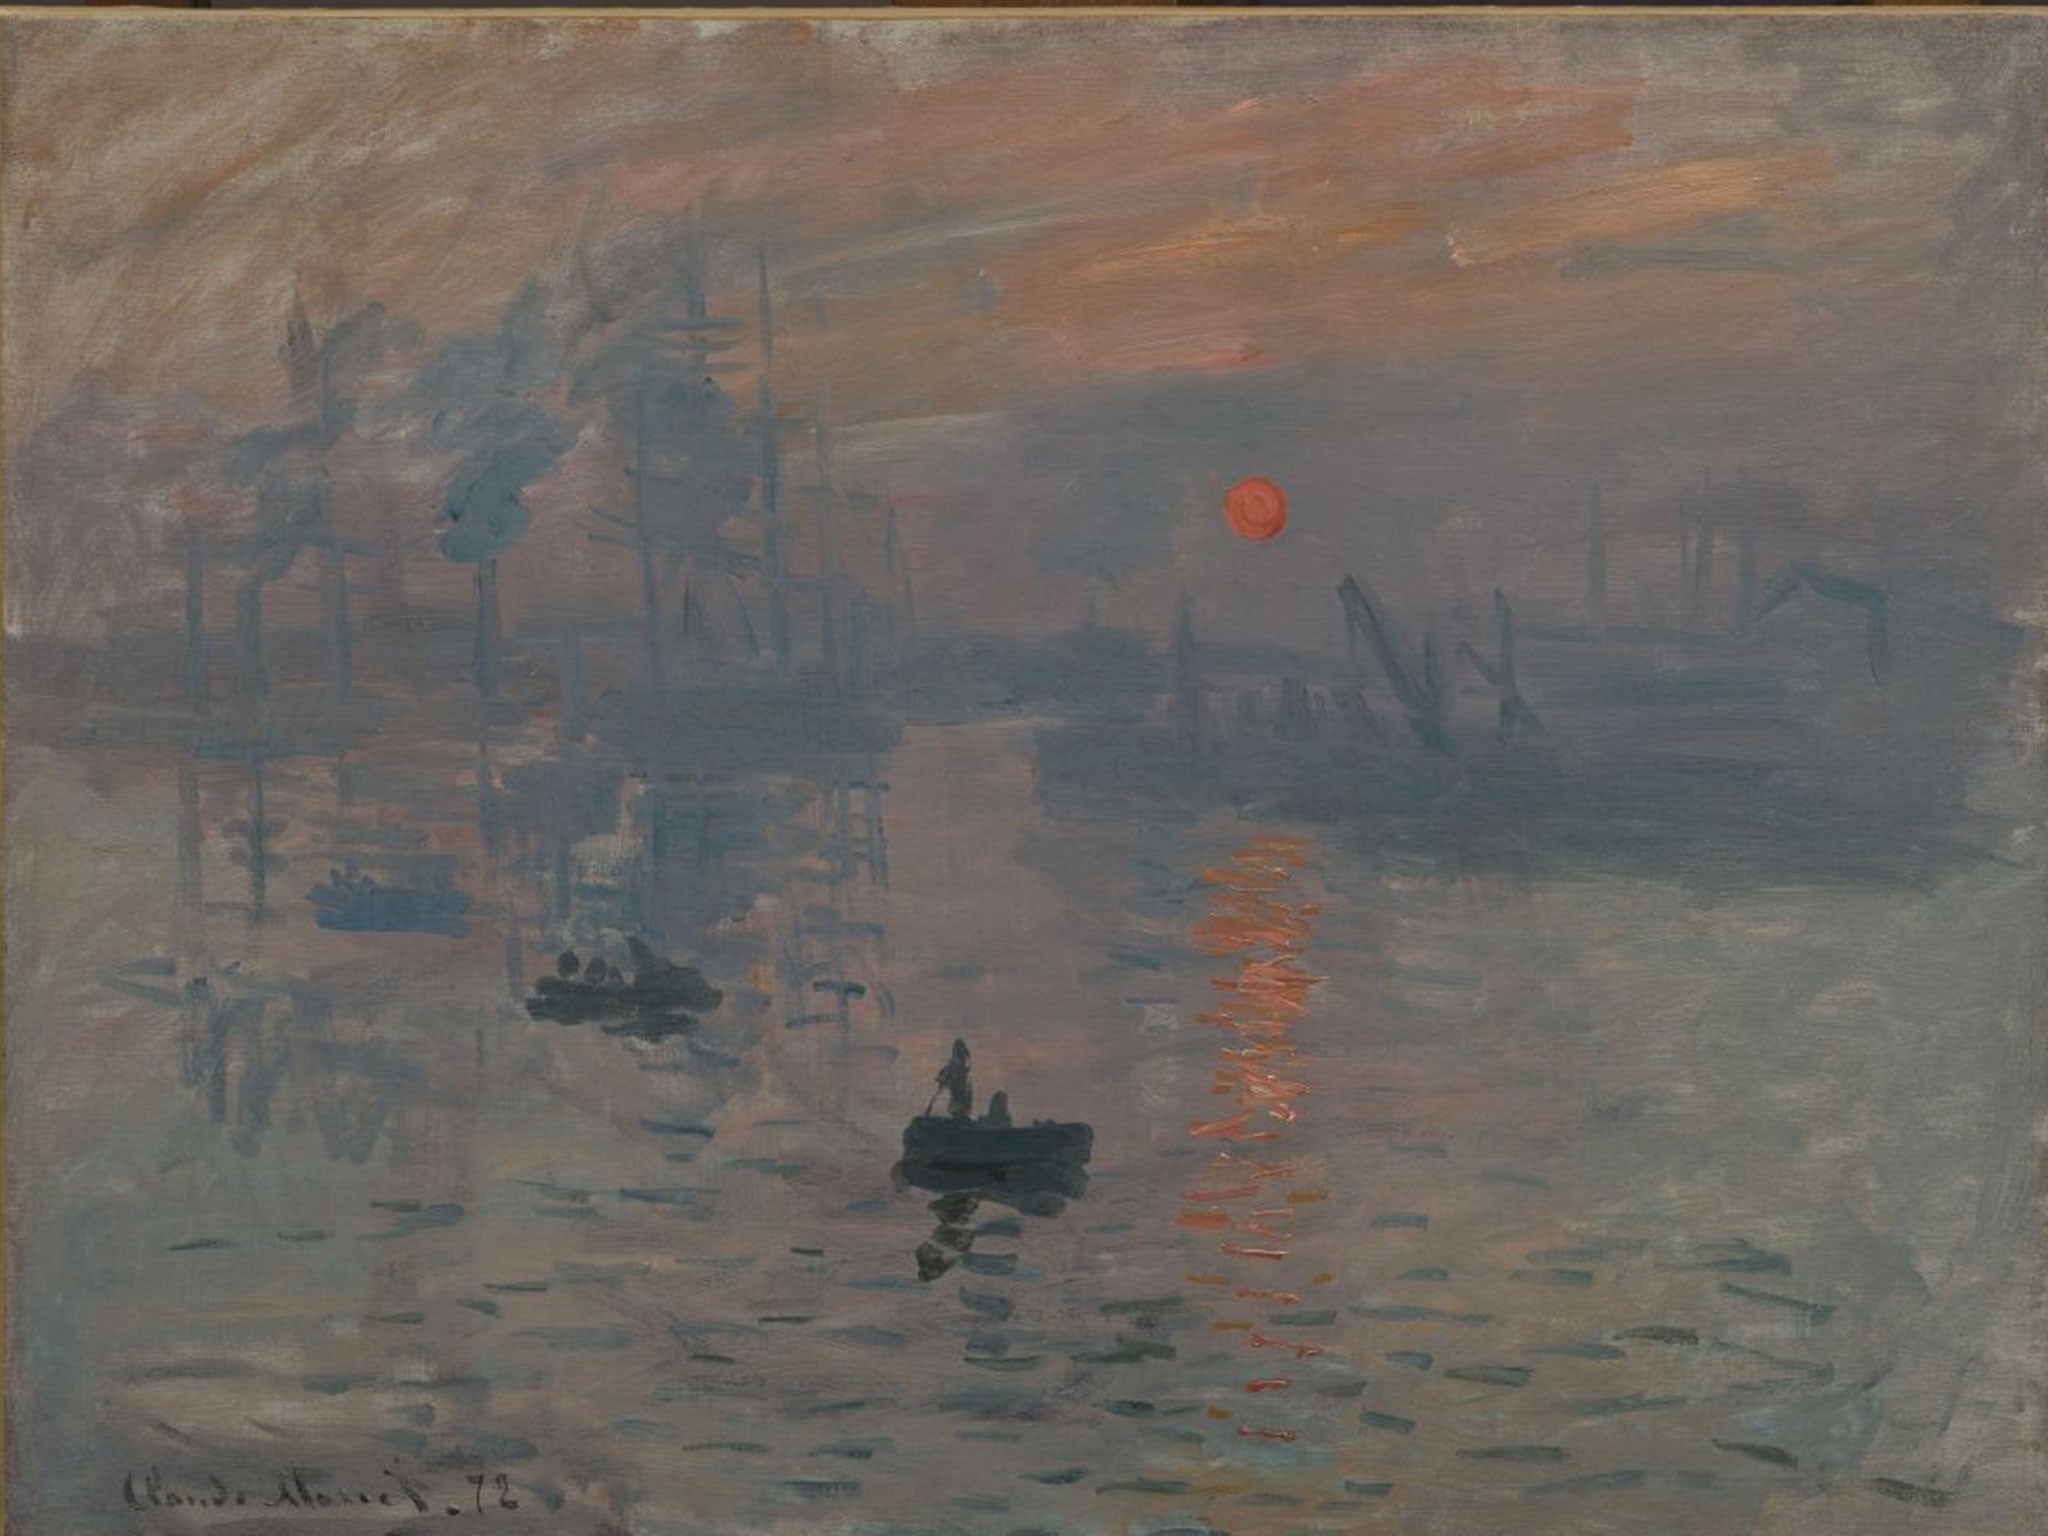 Once they knew Monet's exact viewpoint, the researchers could date the painting by the position of the sun, the height of the tide and the weather